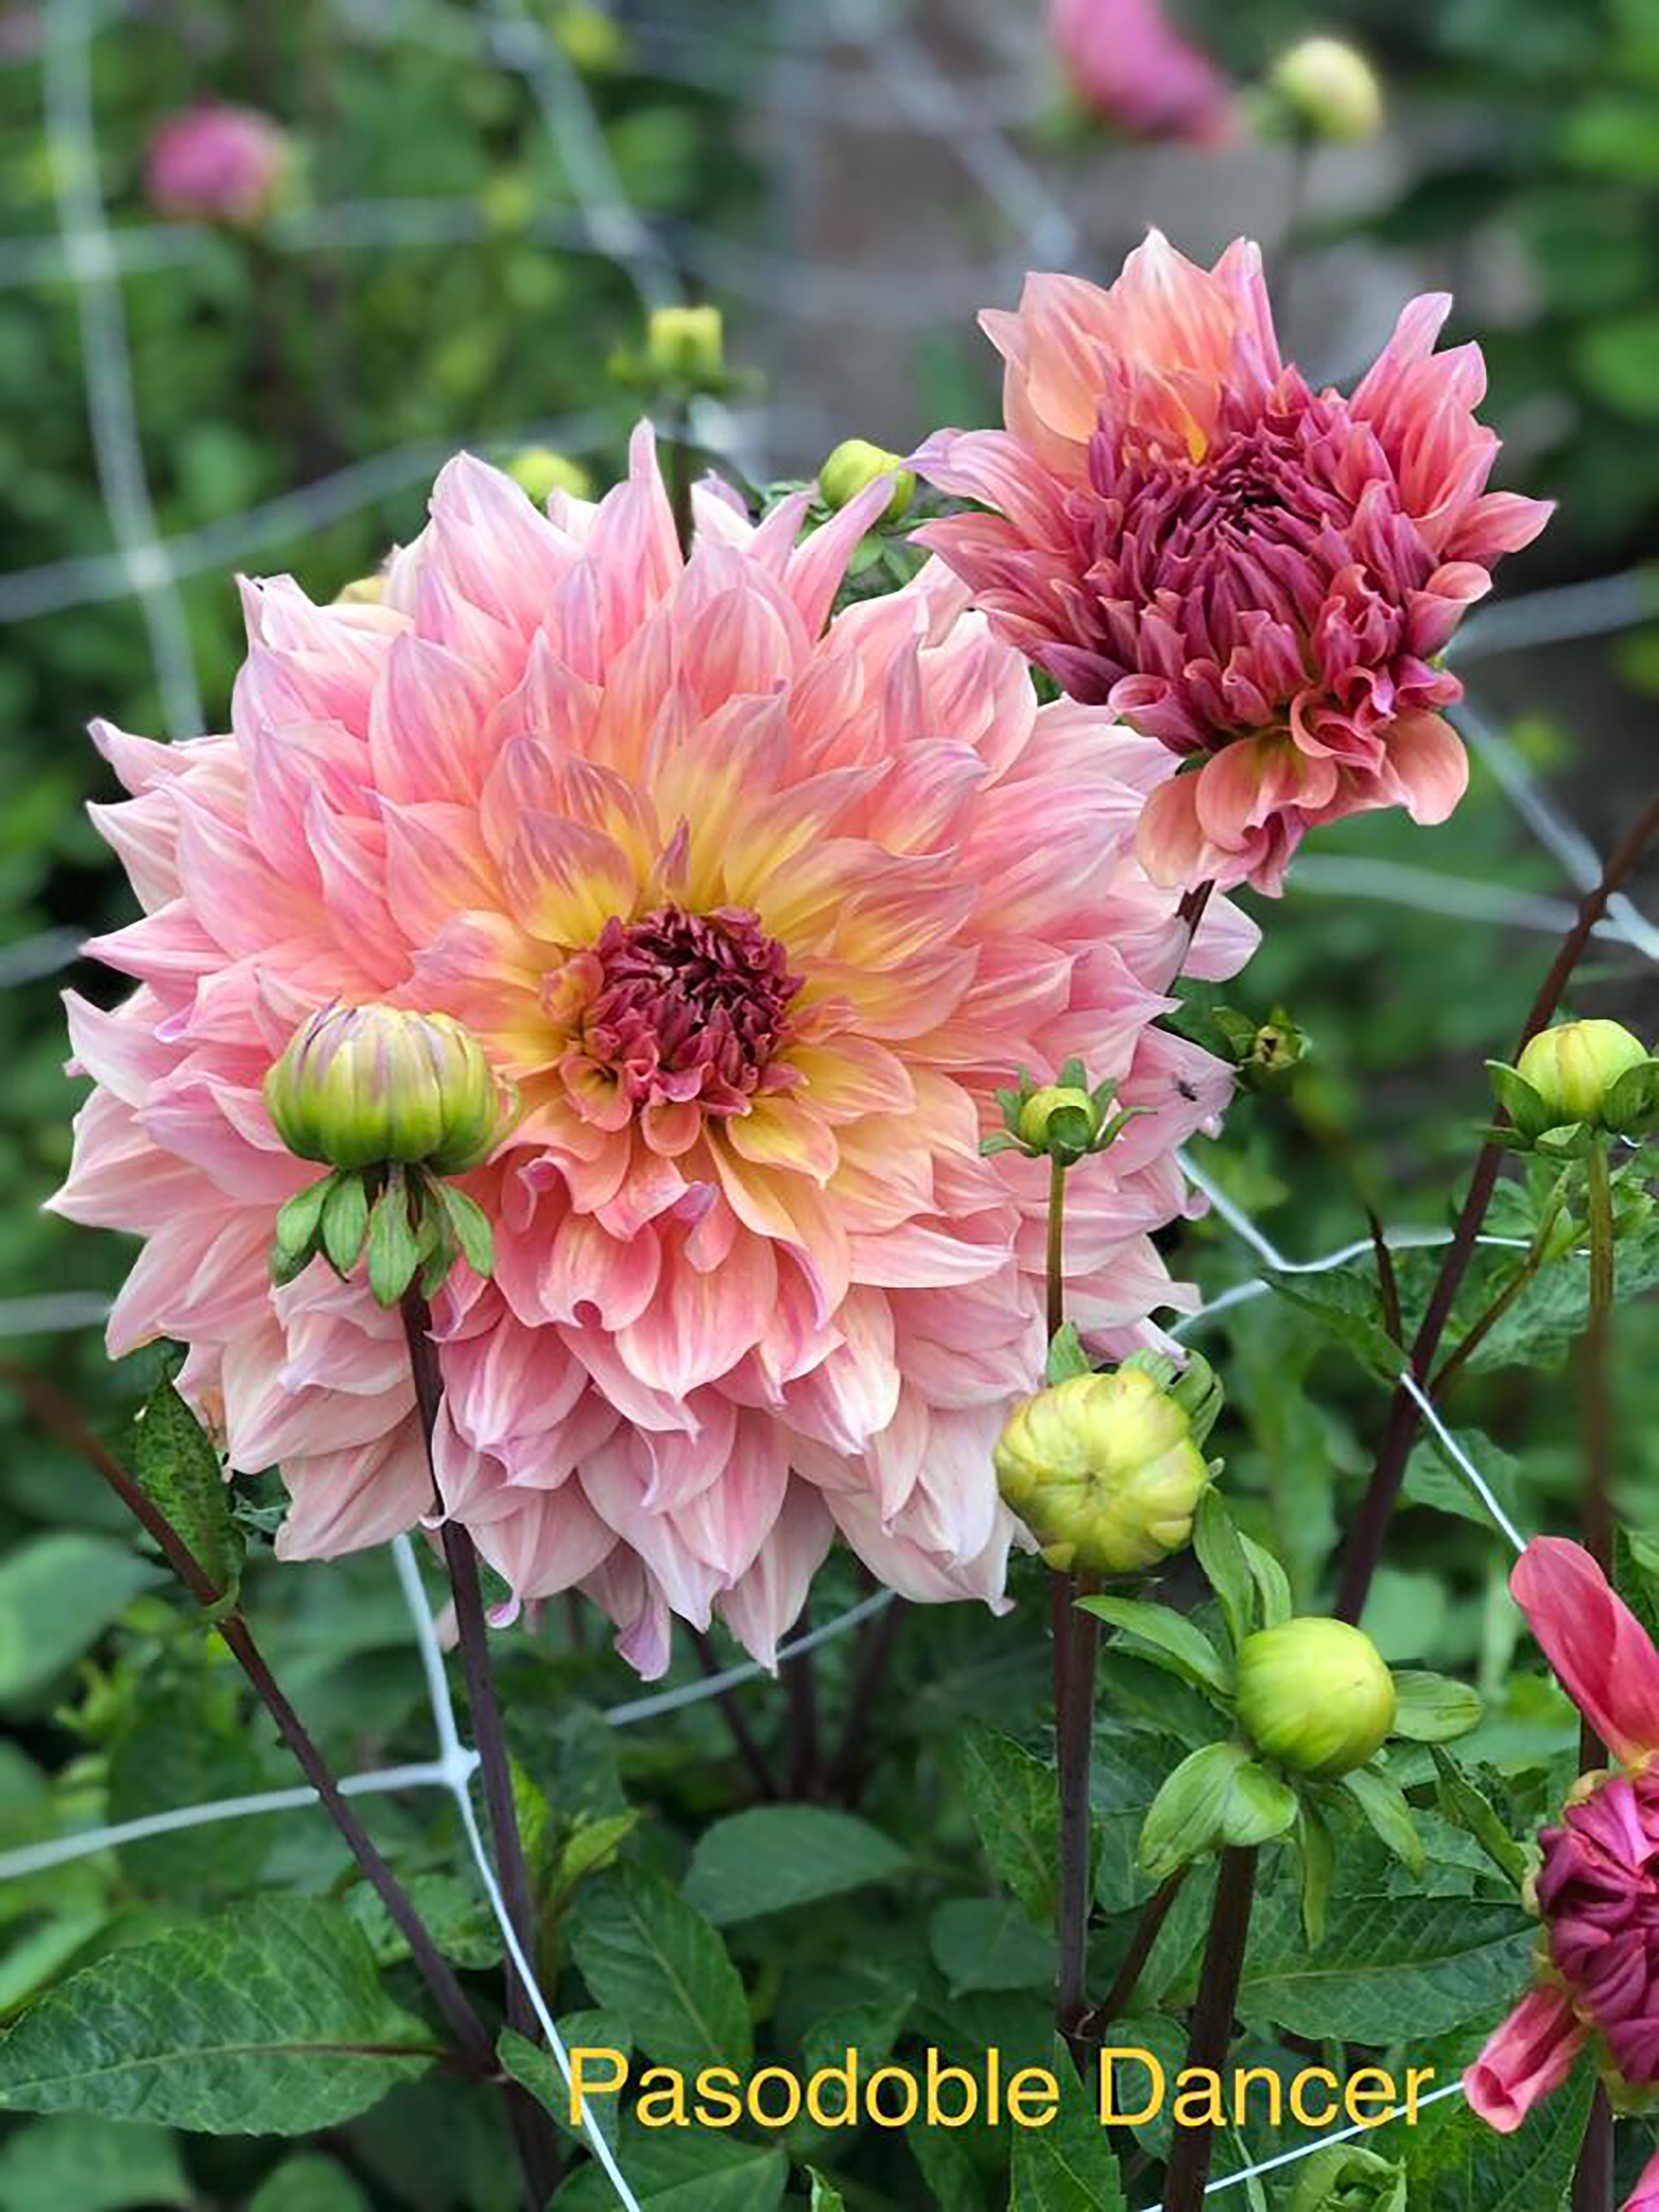 Dahlia 'Pasa Doble Dancer' decorative large flowered - 2, 3 or 5 tubers - Free delivery within the UK